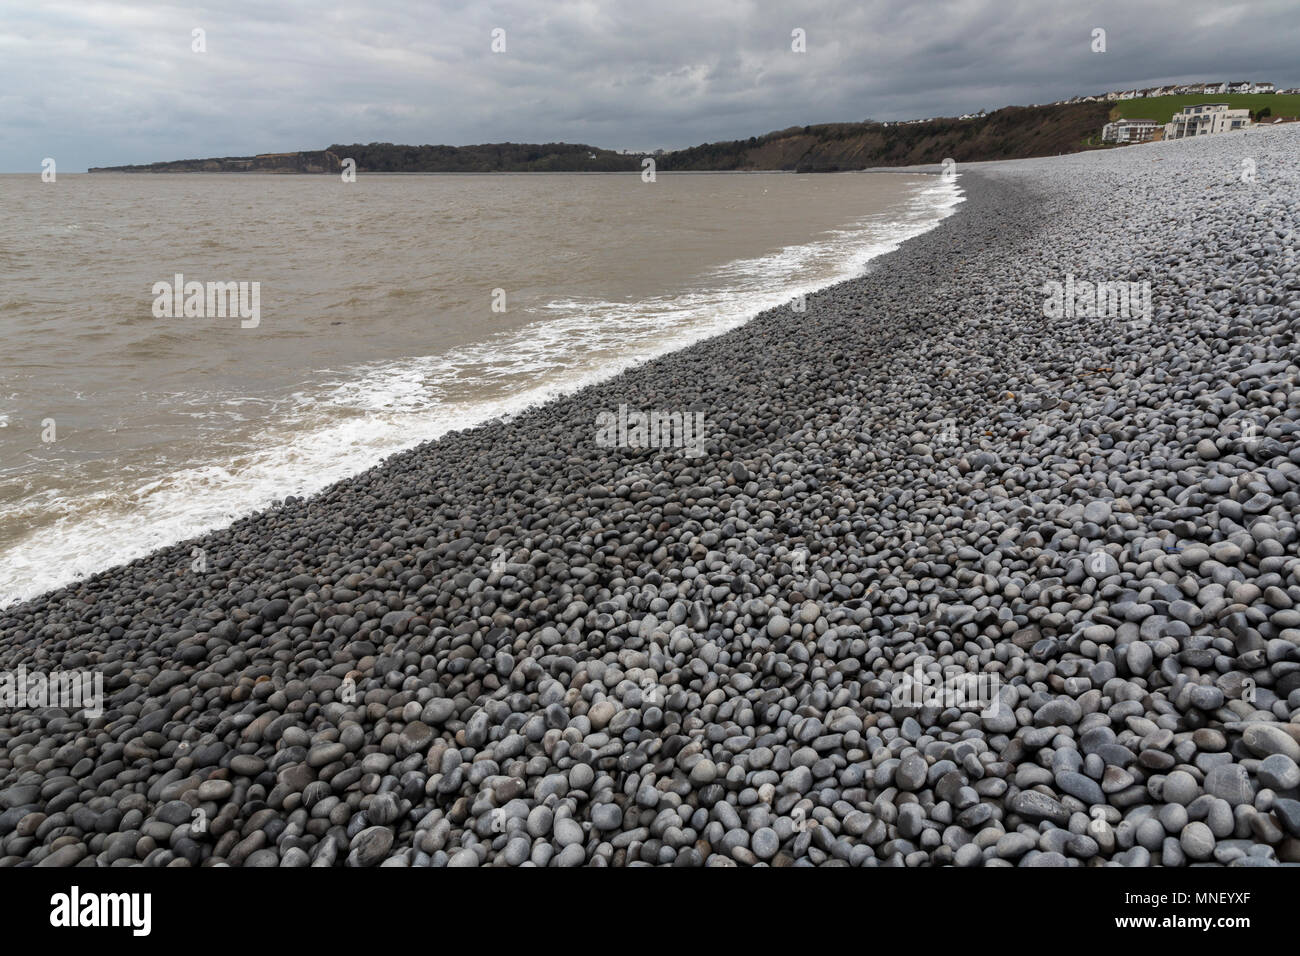 Cobbles on beach with brown silty water in sea, Cold Napp, Barry, Wales, UK Stock Photo